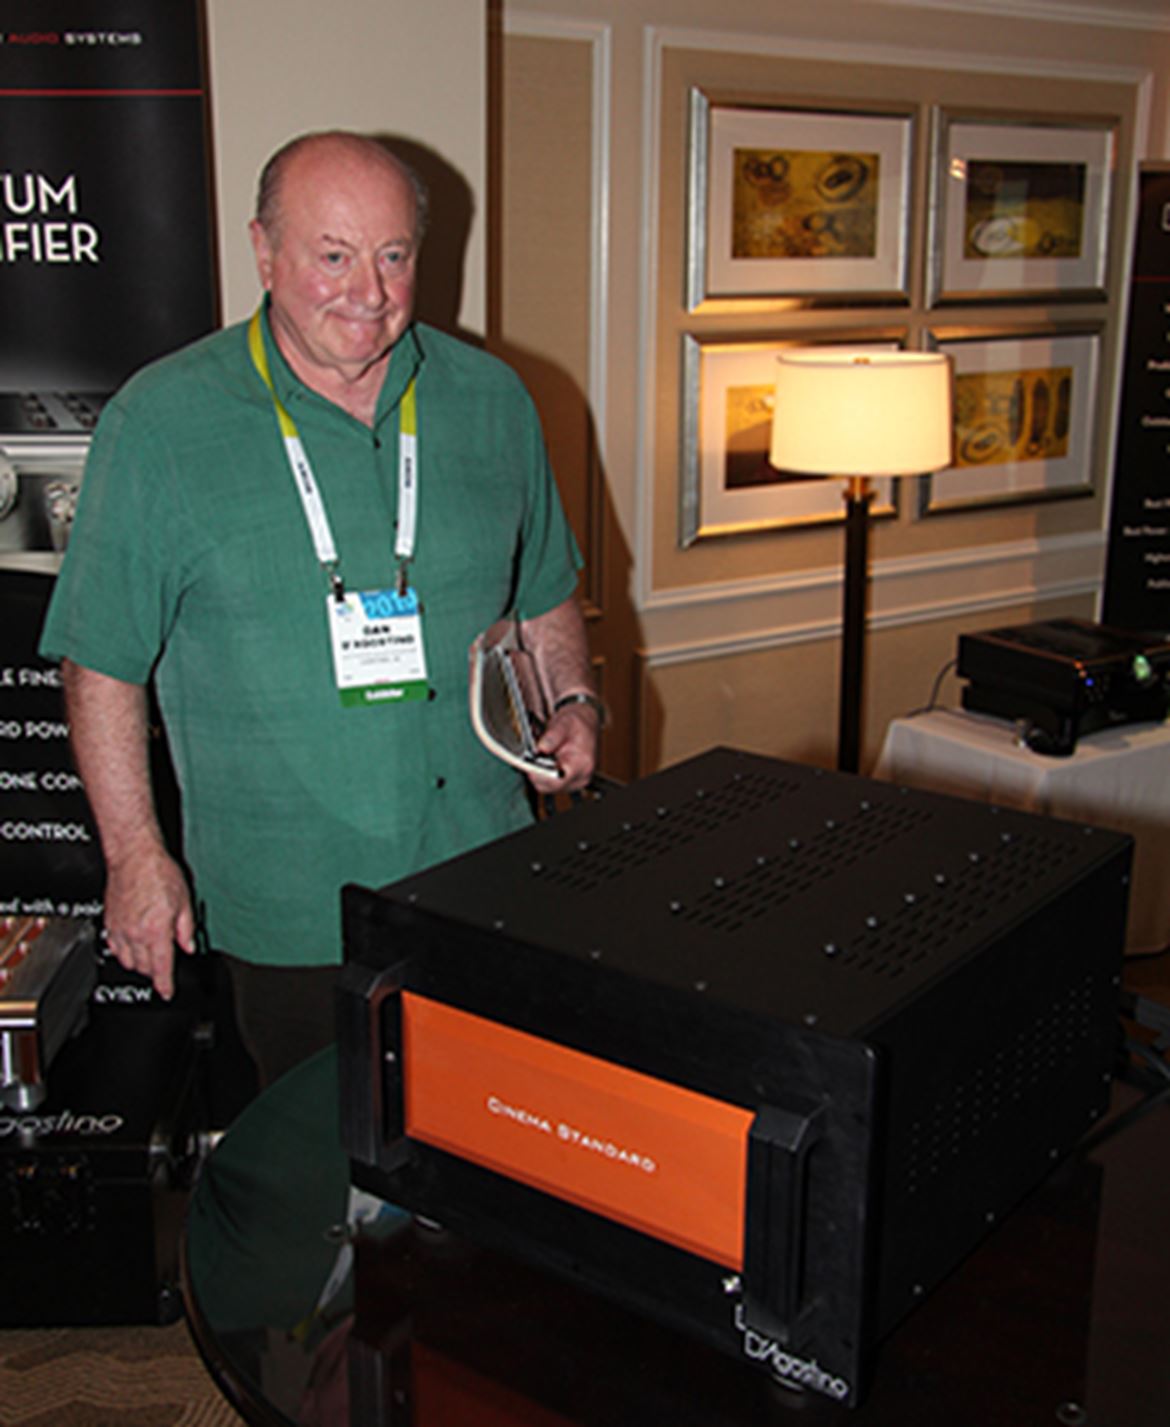 Dan D'Agostino, the man himself, looking happy with the new Cinema Standard Amplifier Series